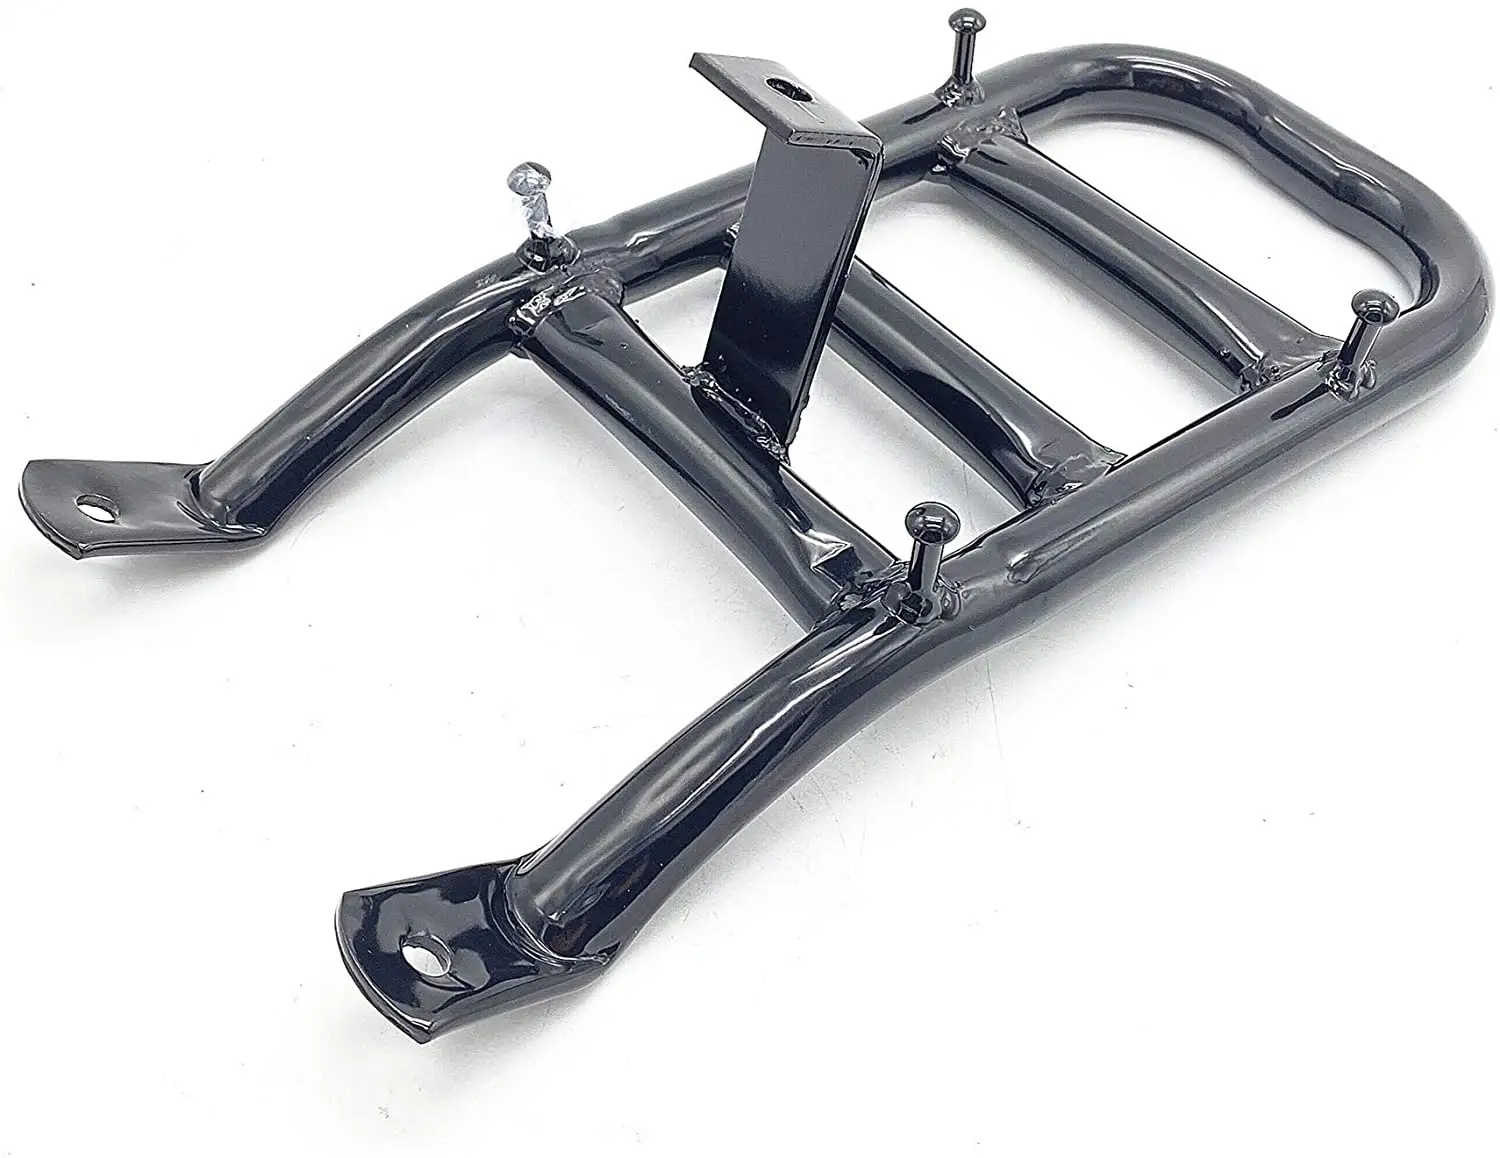 Front Rack for the Coleman CT200U Mini Bike with bolts and nuts